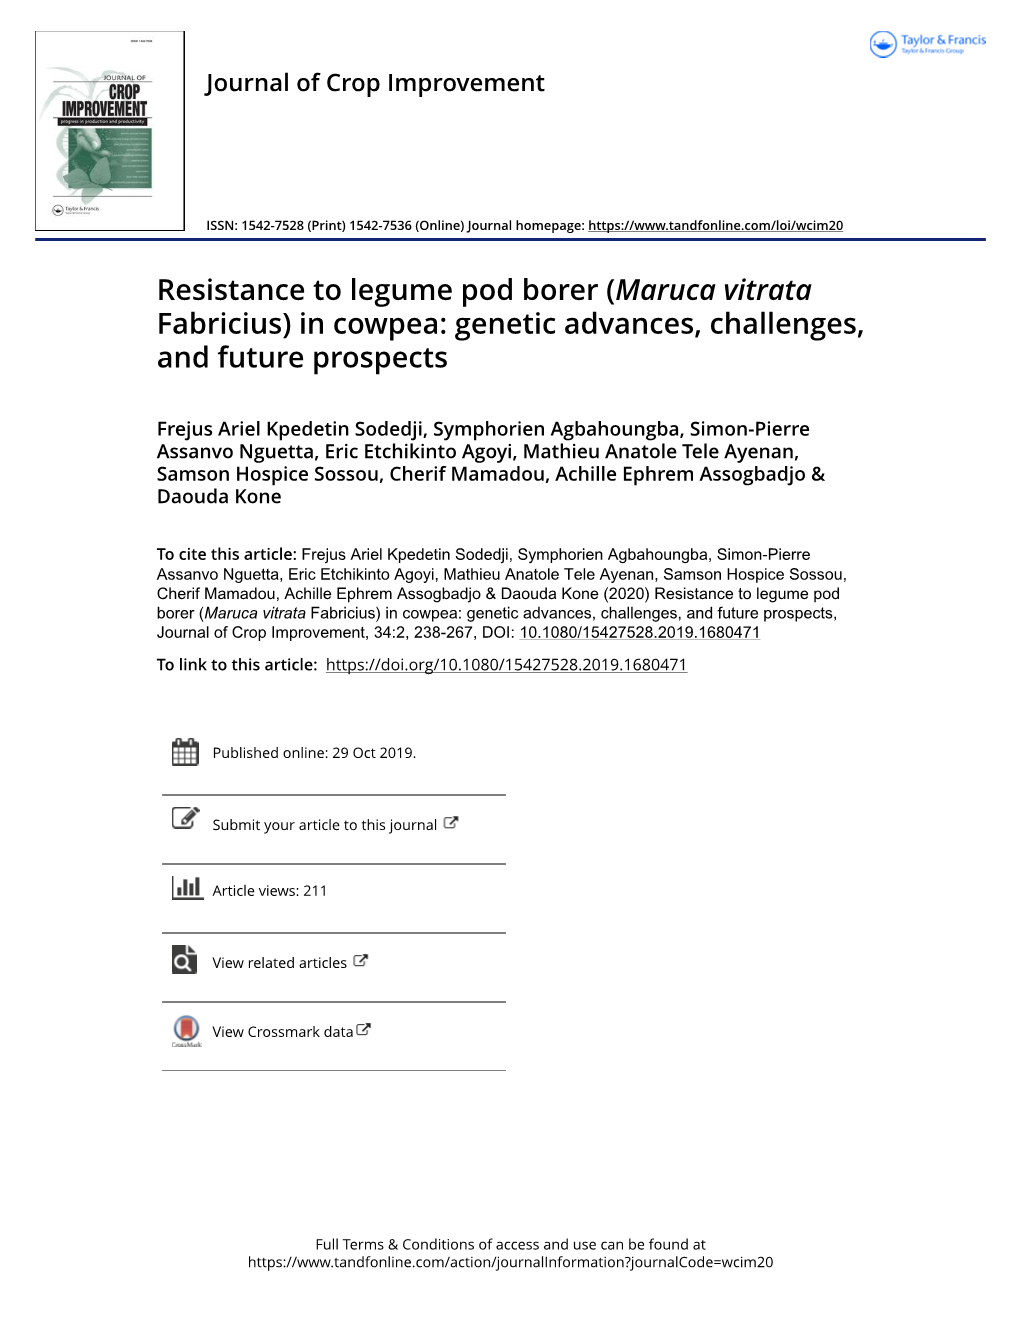 Resistance to Legume Pod Borer (Maruca Vitrata Fabricius) in Cowpea: Genetic Advances, Challenges, and Future Prospects